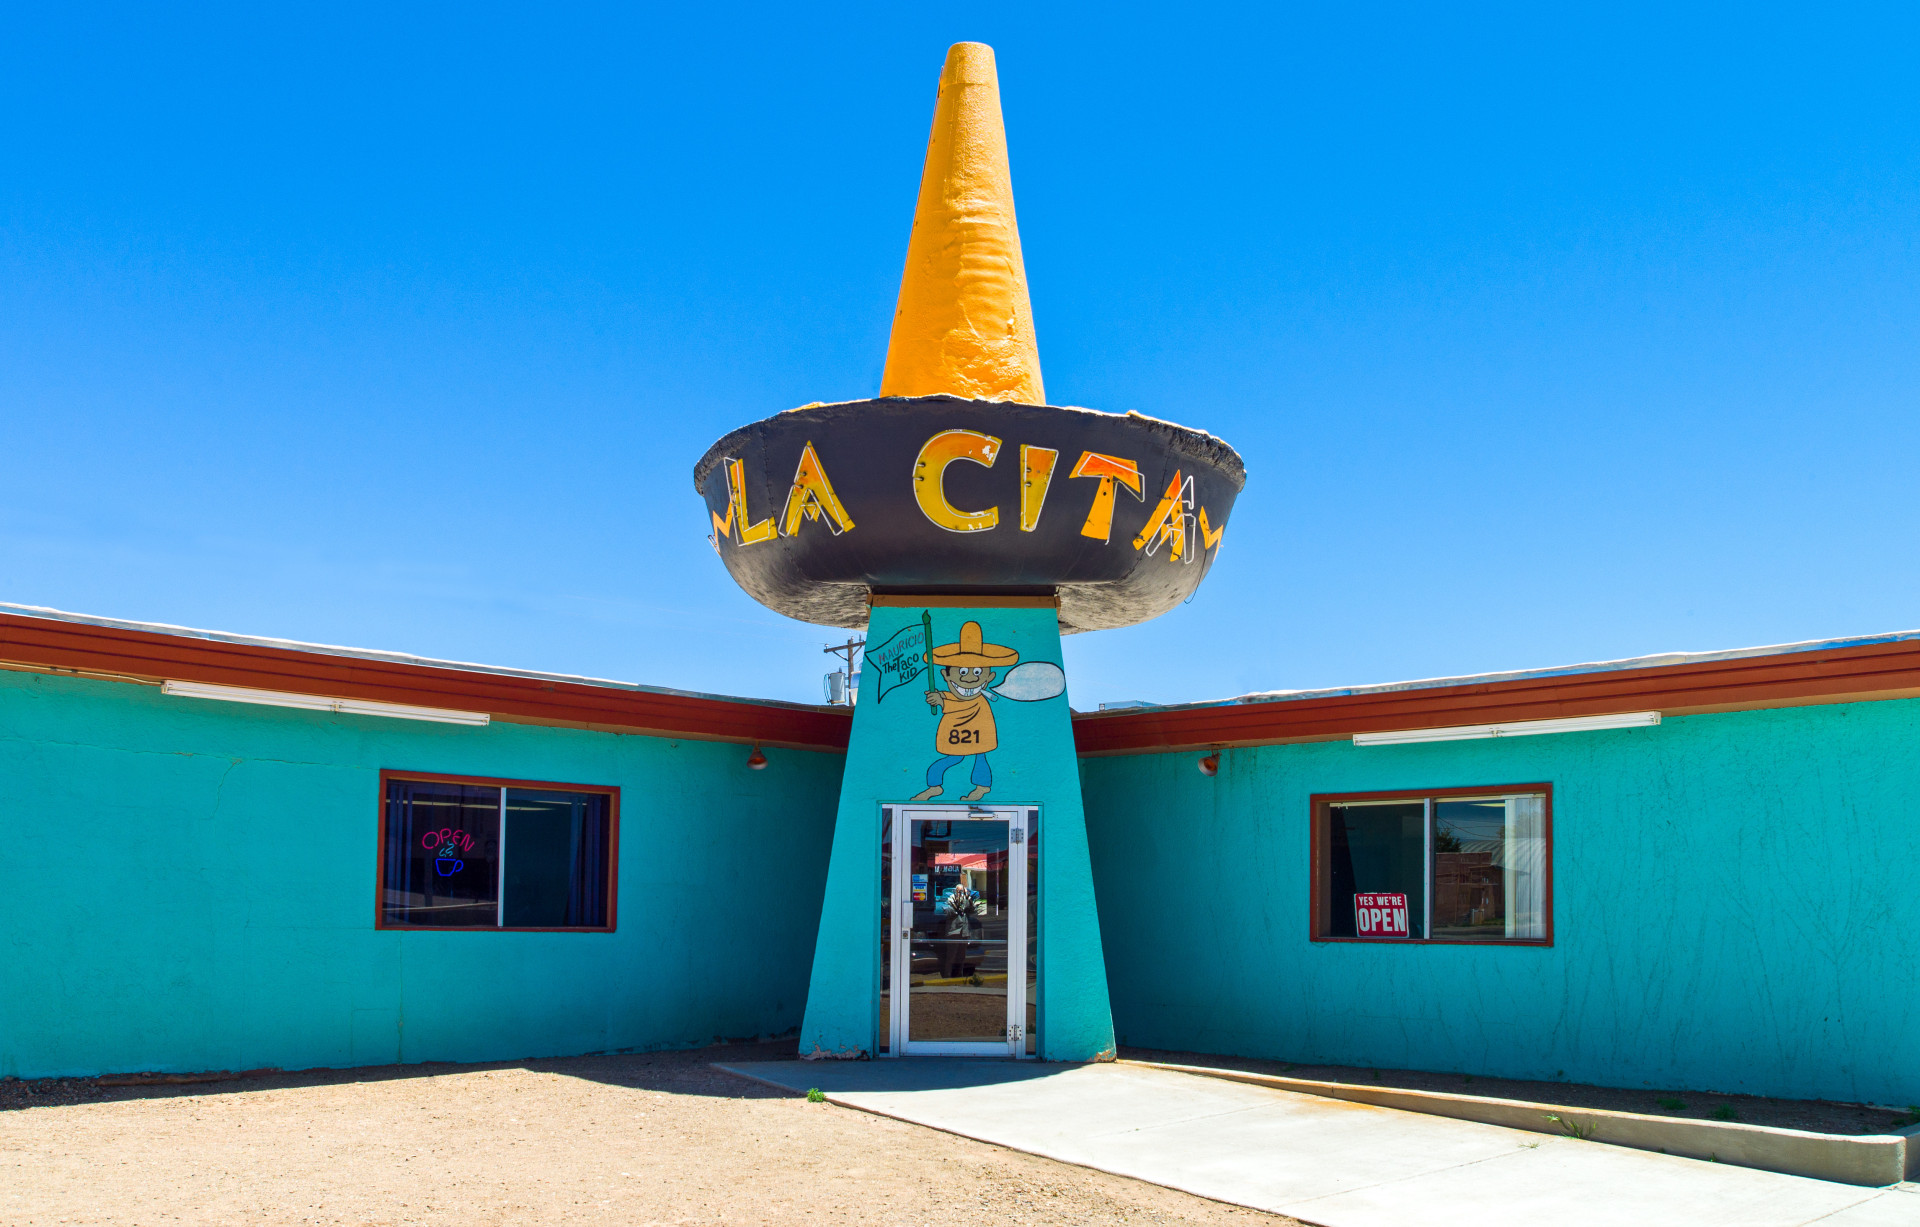 Tucumcari also boasts equally colorful and attractive cafe-restaurants.